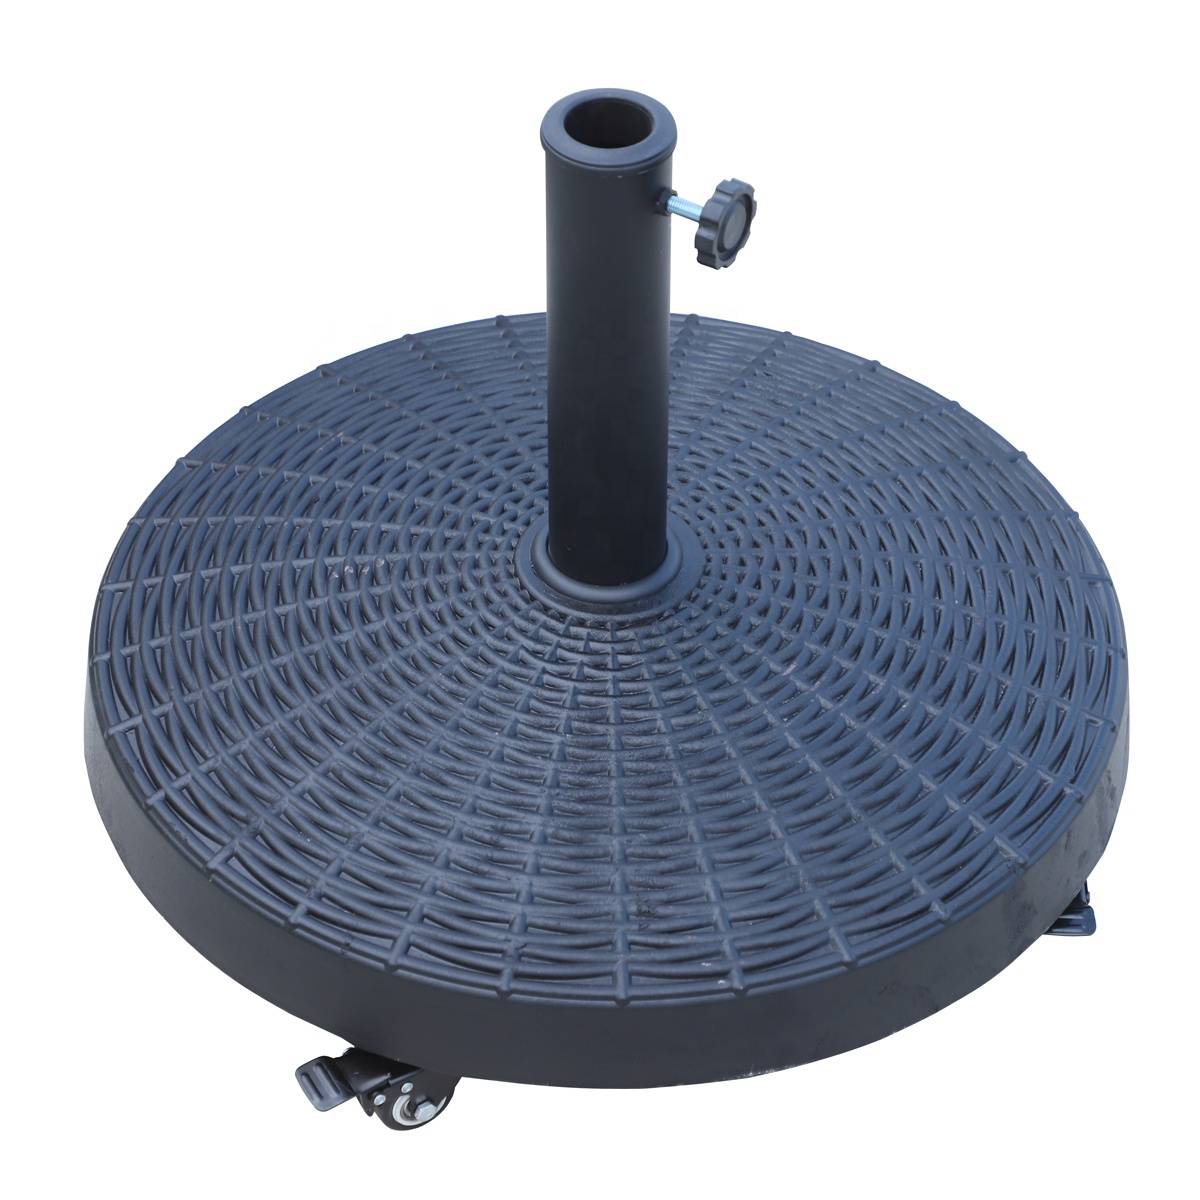 Wholesale Price Rolling Umbrella Base - Outdoor Leisure Patio Round  Resin Umbrella Base Stand with Wheels – Top Asian